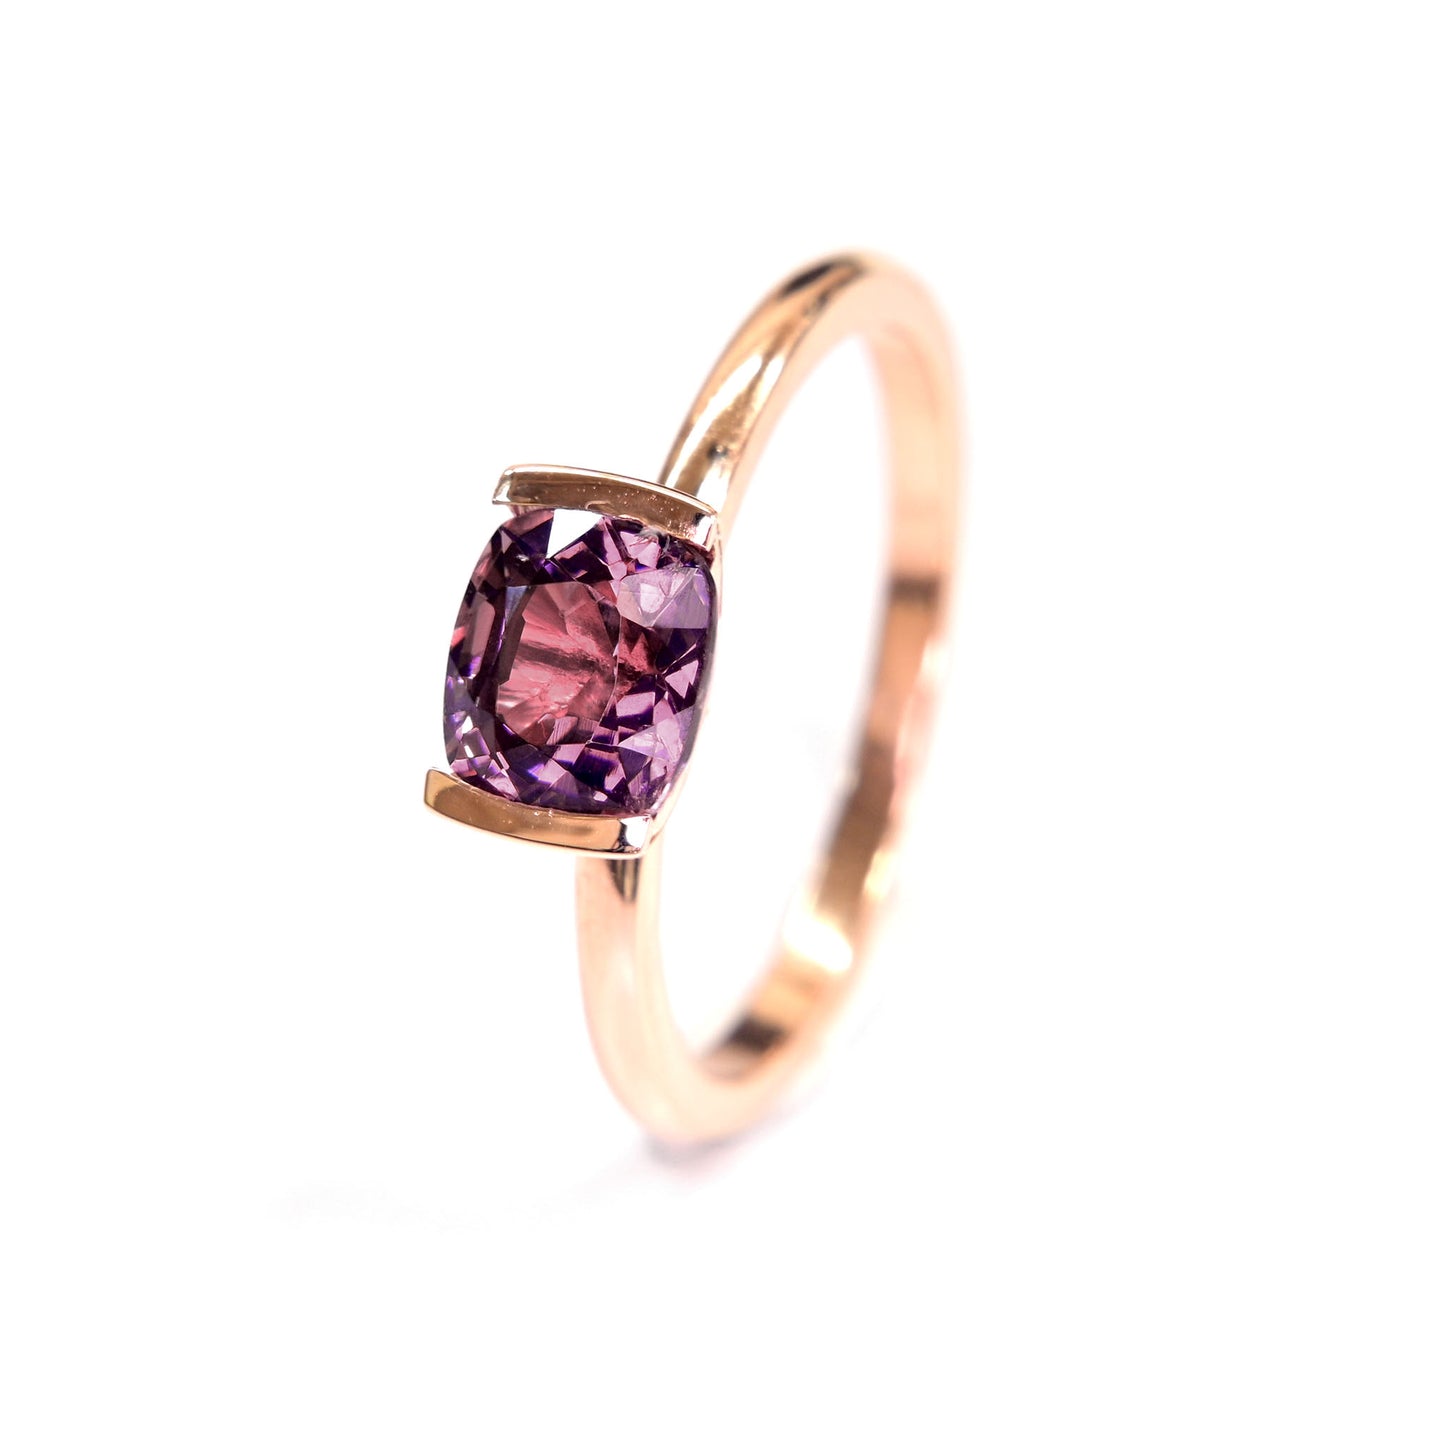 The Fusion Spinel ring wih unheated pink spinel available in Chiang Mai